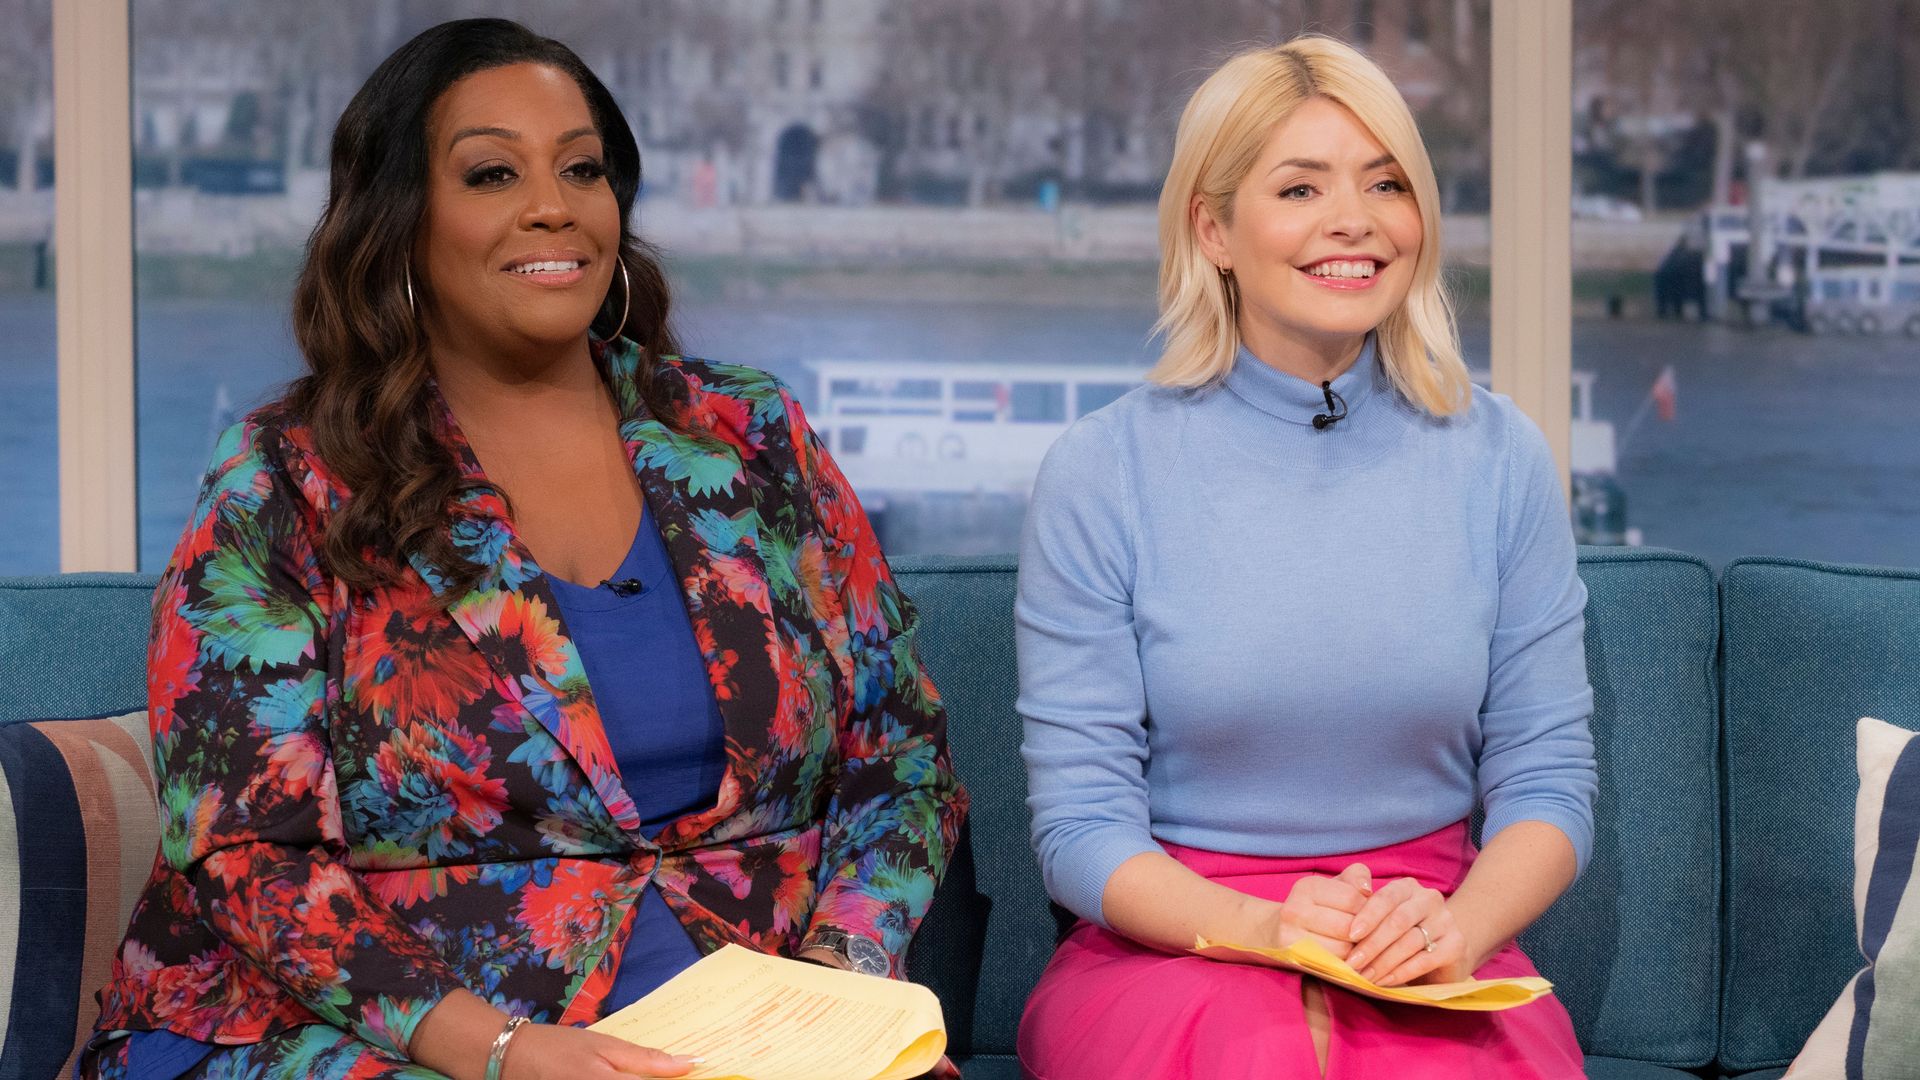 Alison Hammond and Holly Willoughby on
'This Morning' 